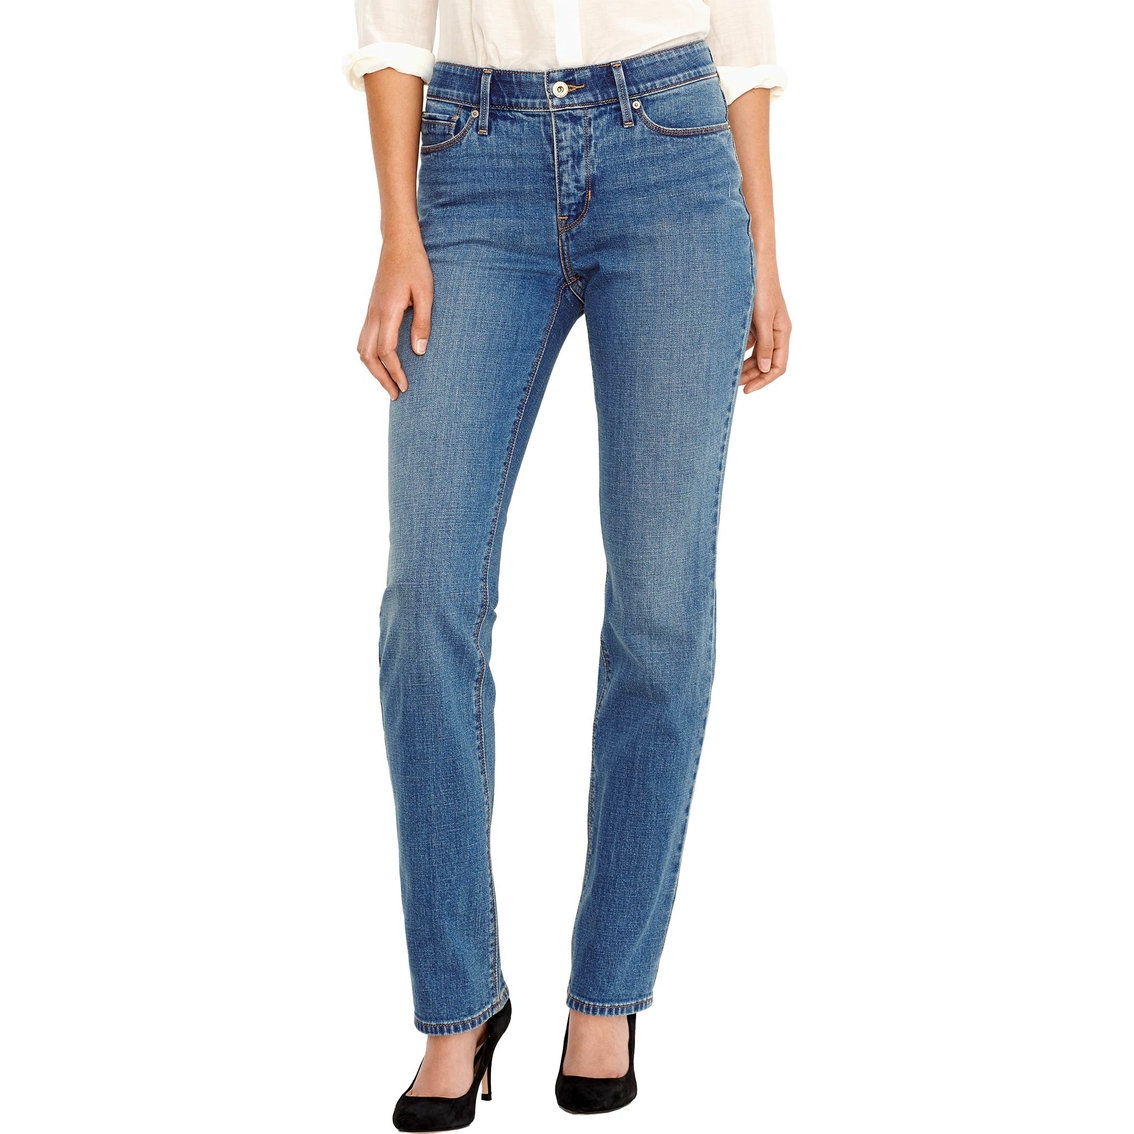 Levi's 525 Perfect Waist Straight Leg Jeans | Jeans | Clothing ...